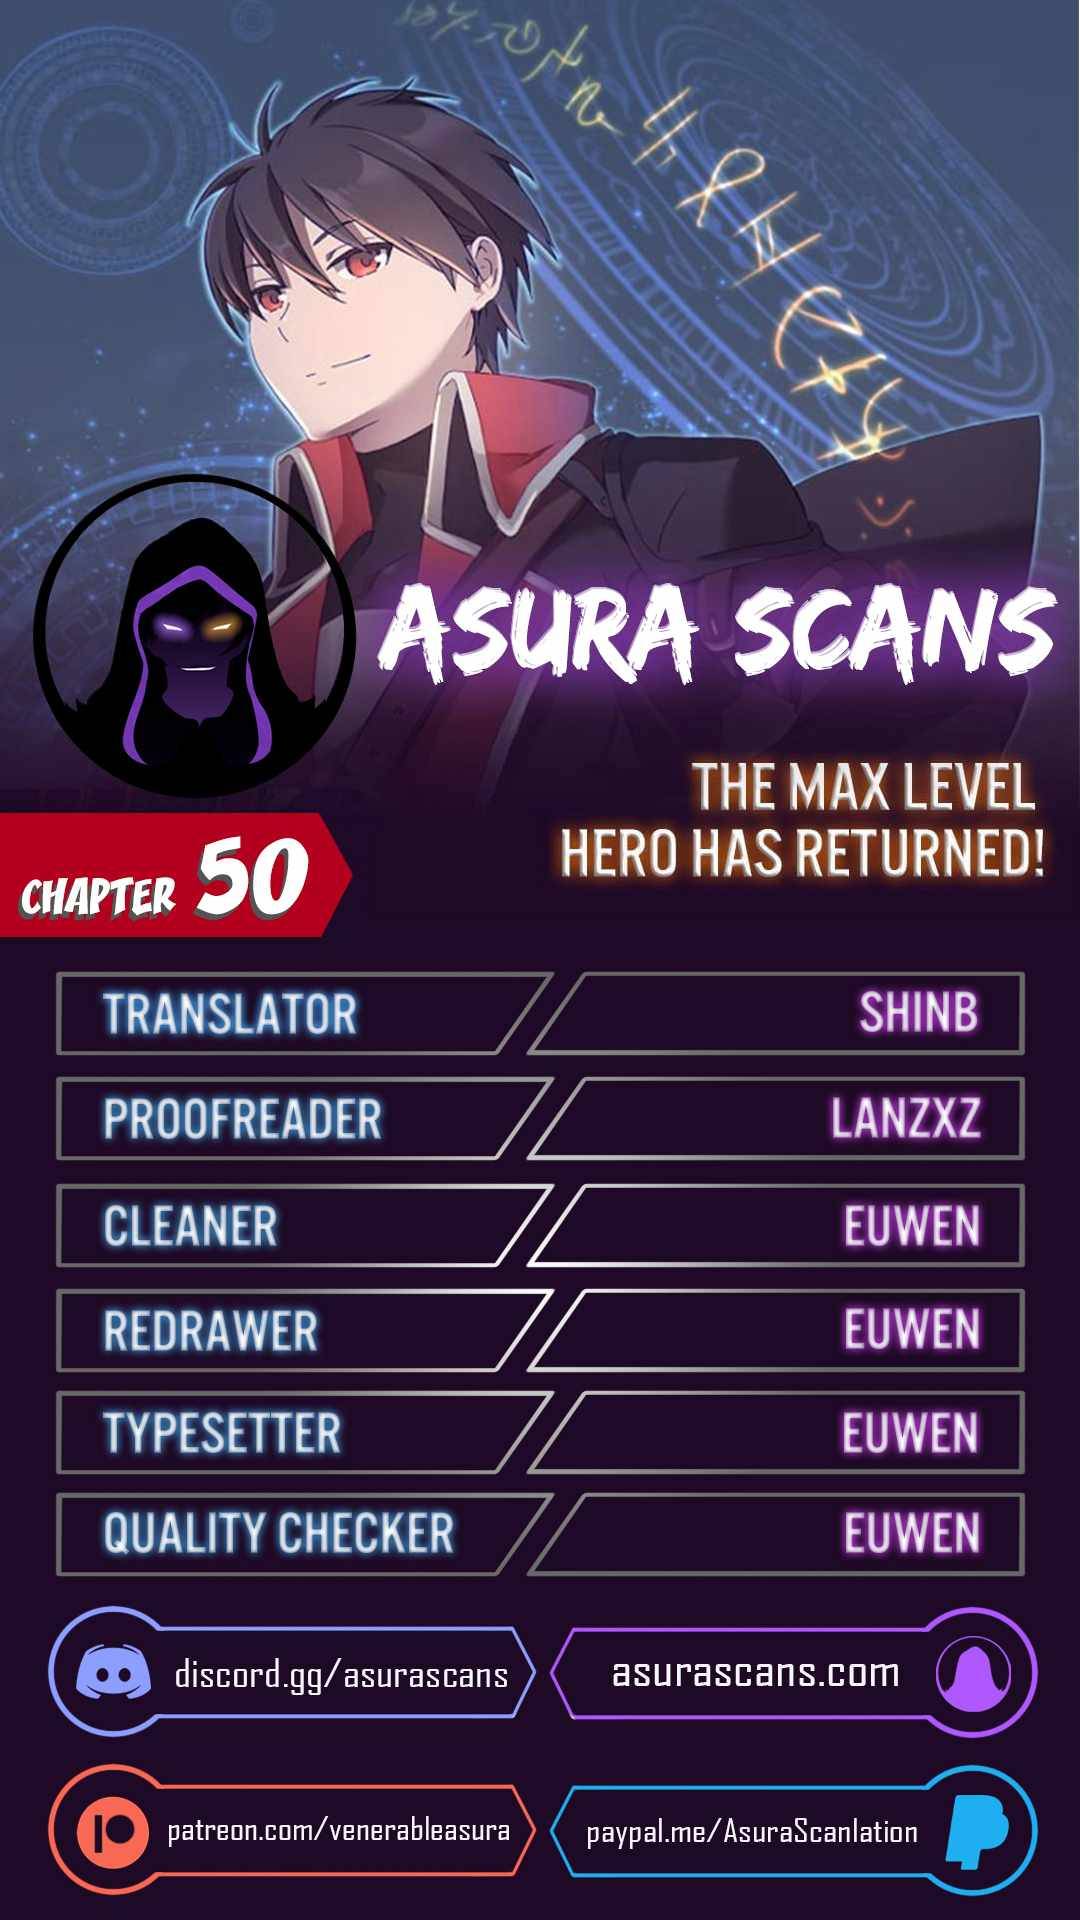 The MAX leveled hero will return! Chapter 50